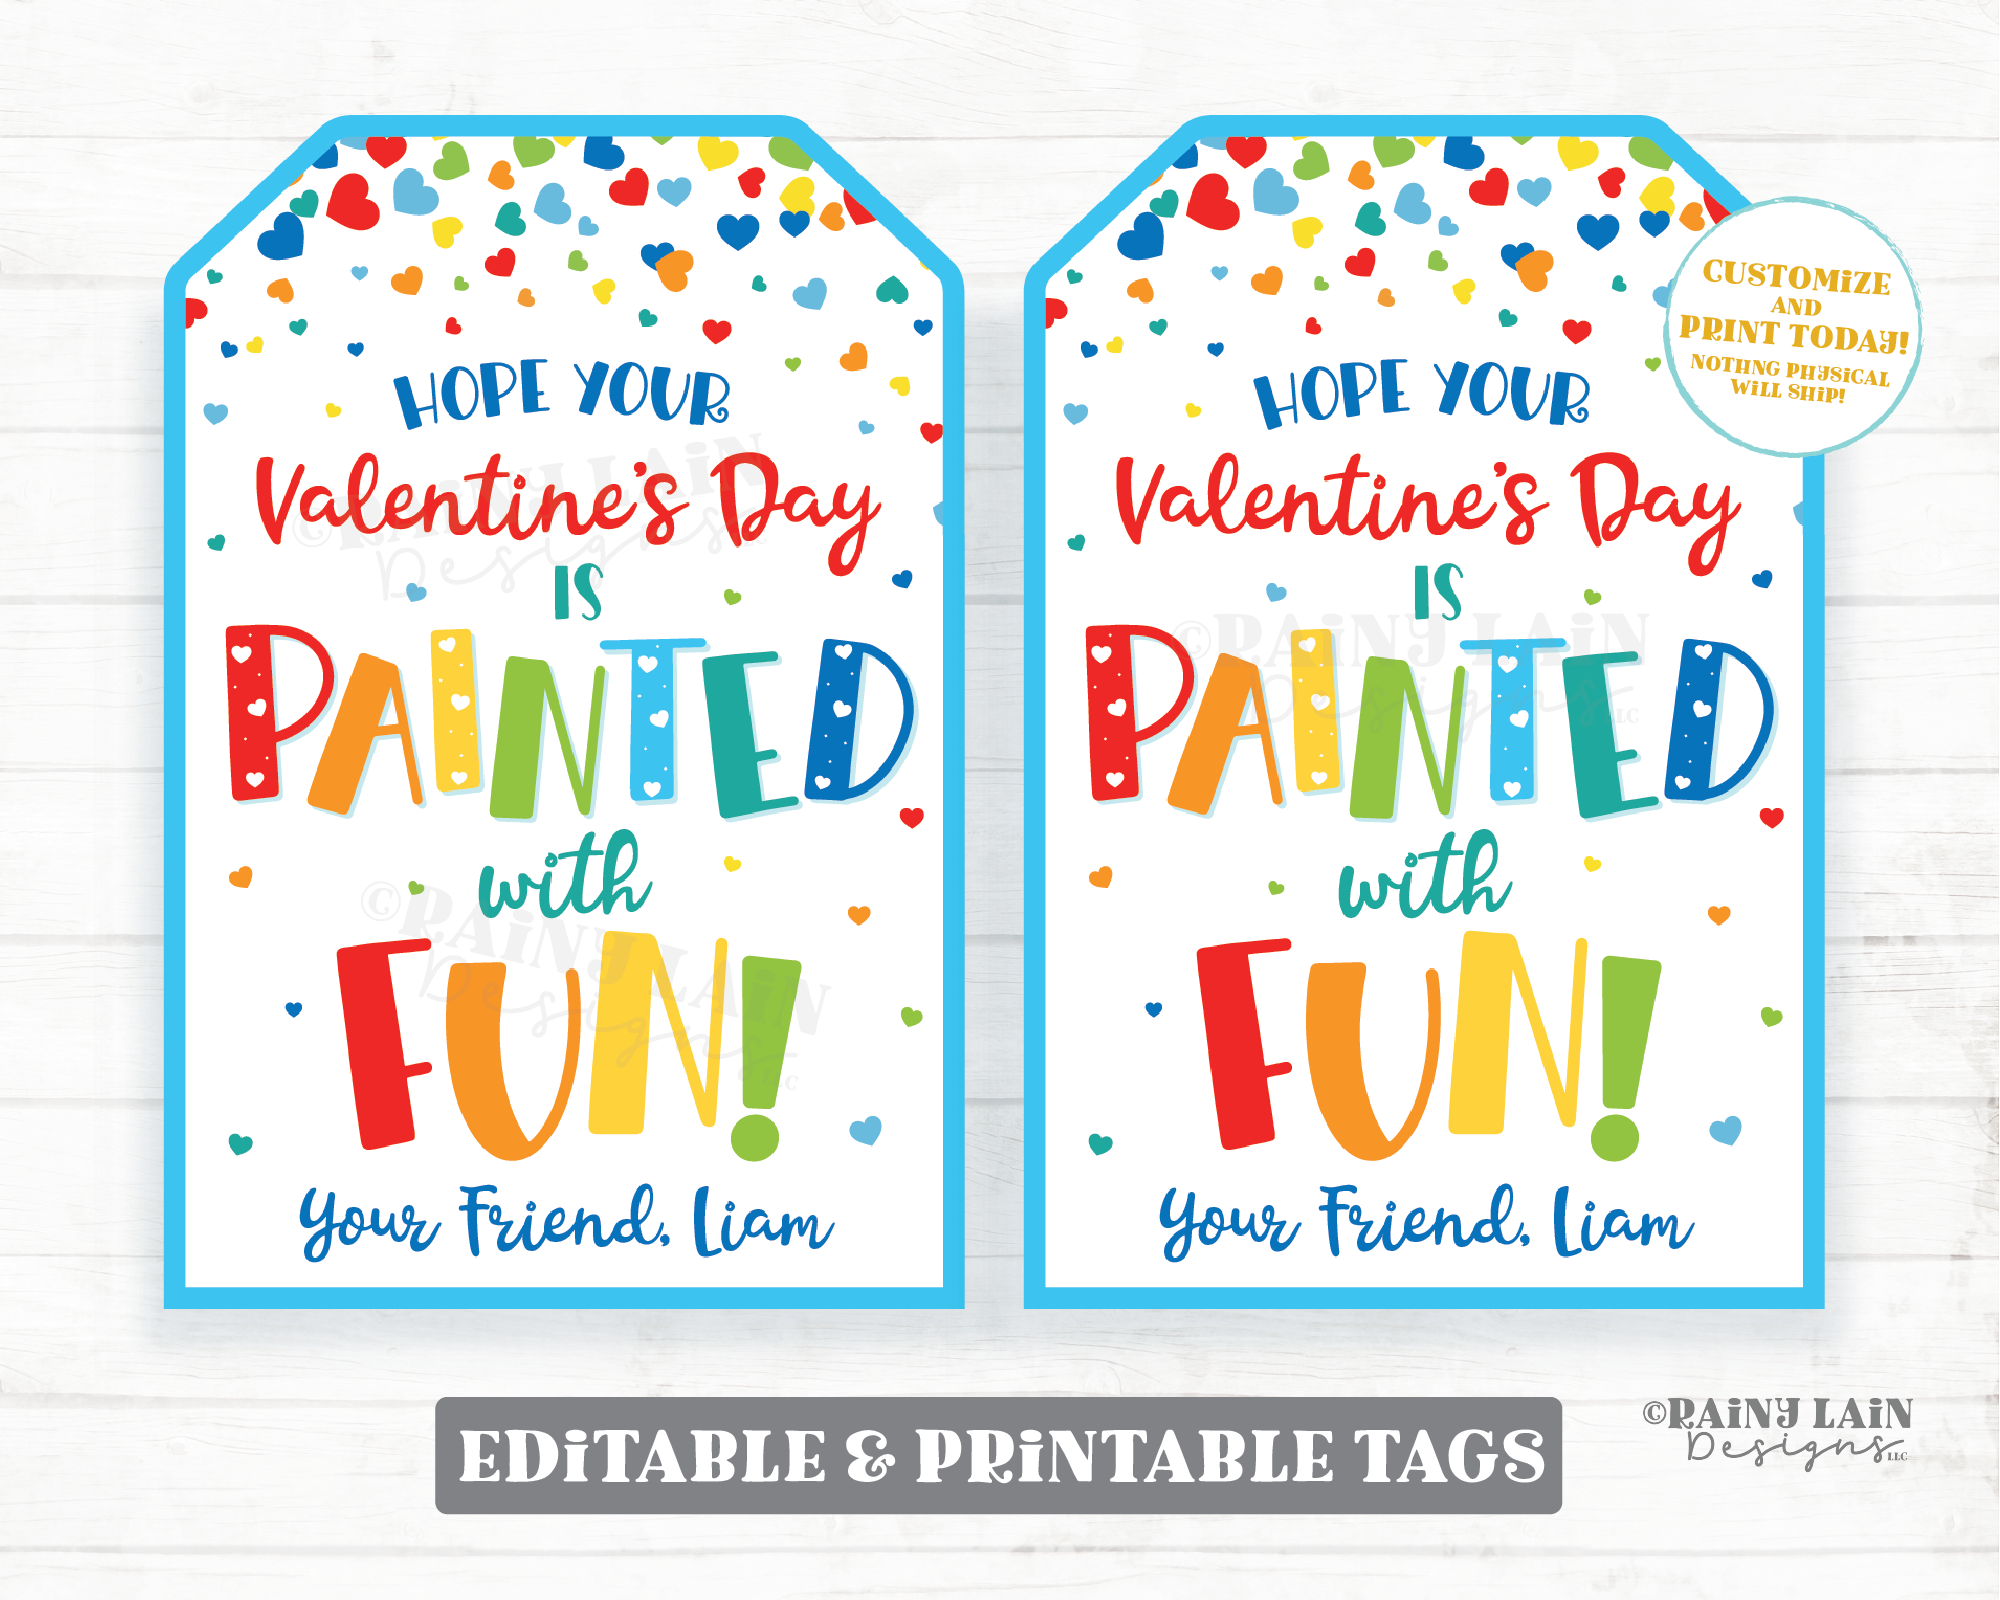 Painted with Fun Valentine Painting Palette Art Paint Brush Valentine's Day Gift Tag Preschool Classroom Non-Candy Printable Editable Tag